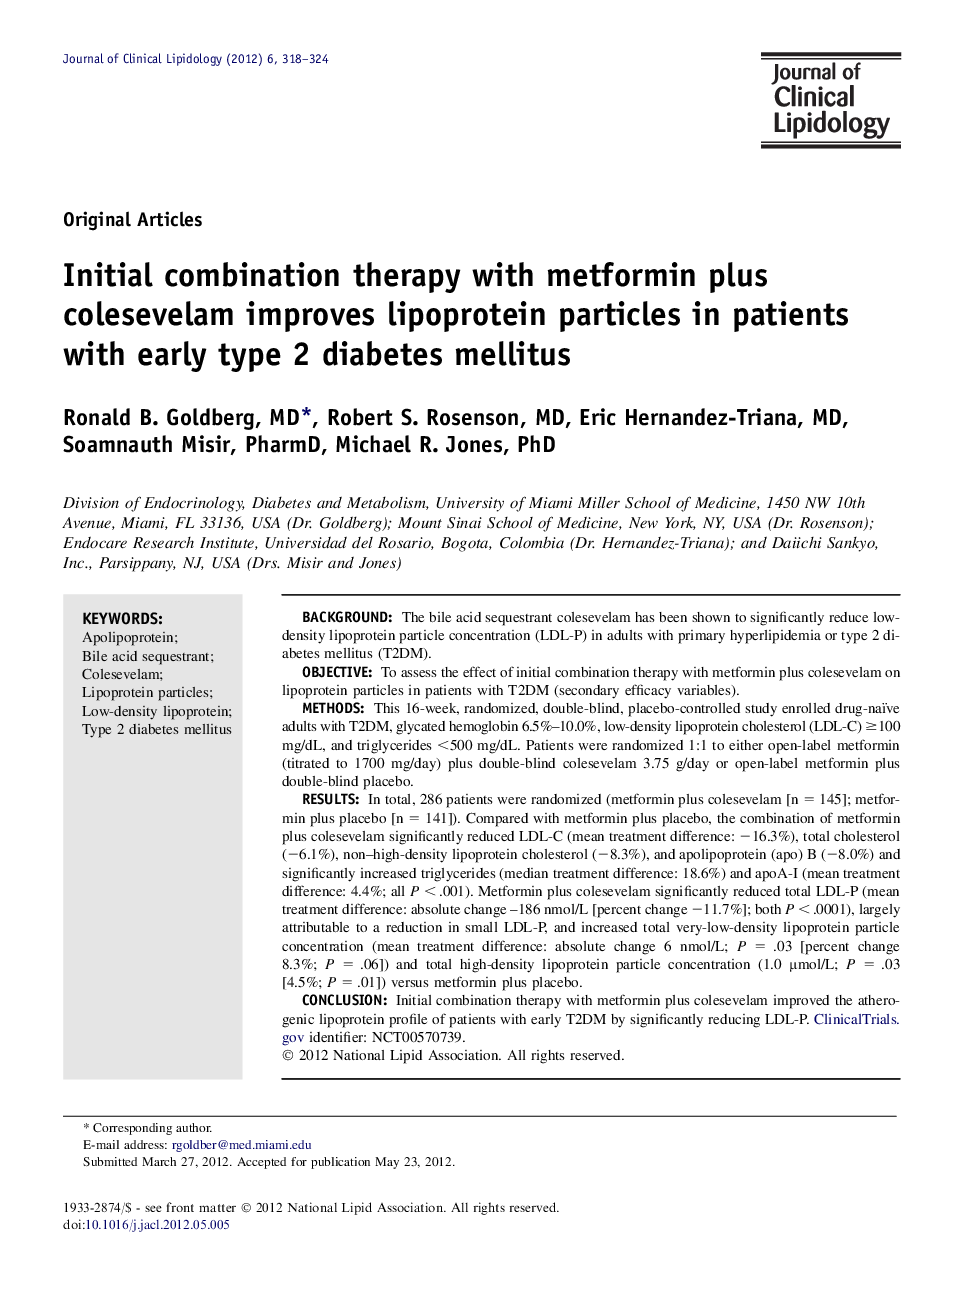 Initial combination therapy with metformin plus colesevelam improves lipoprotein particles in patients with early type 2 diabetes mellitus